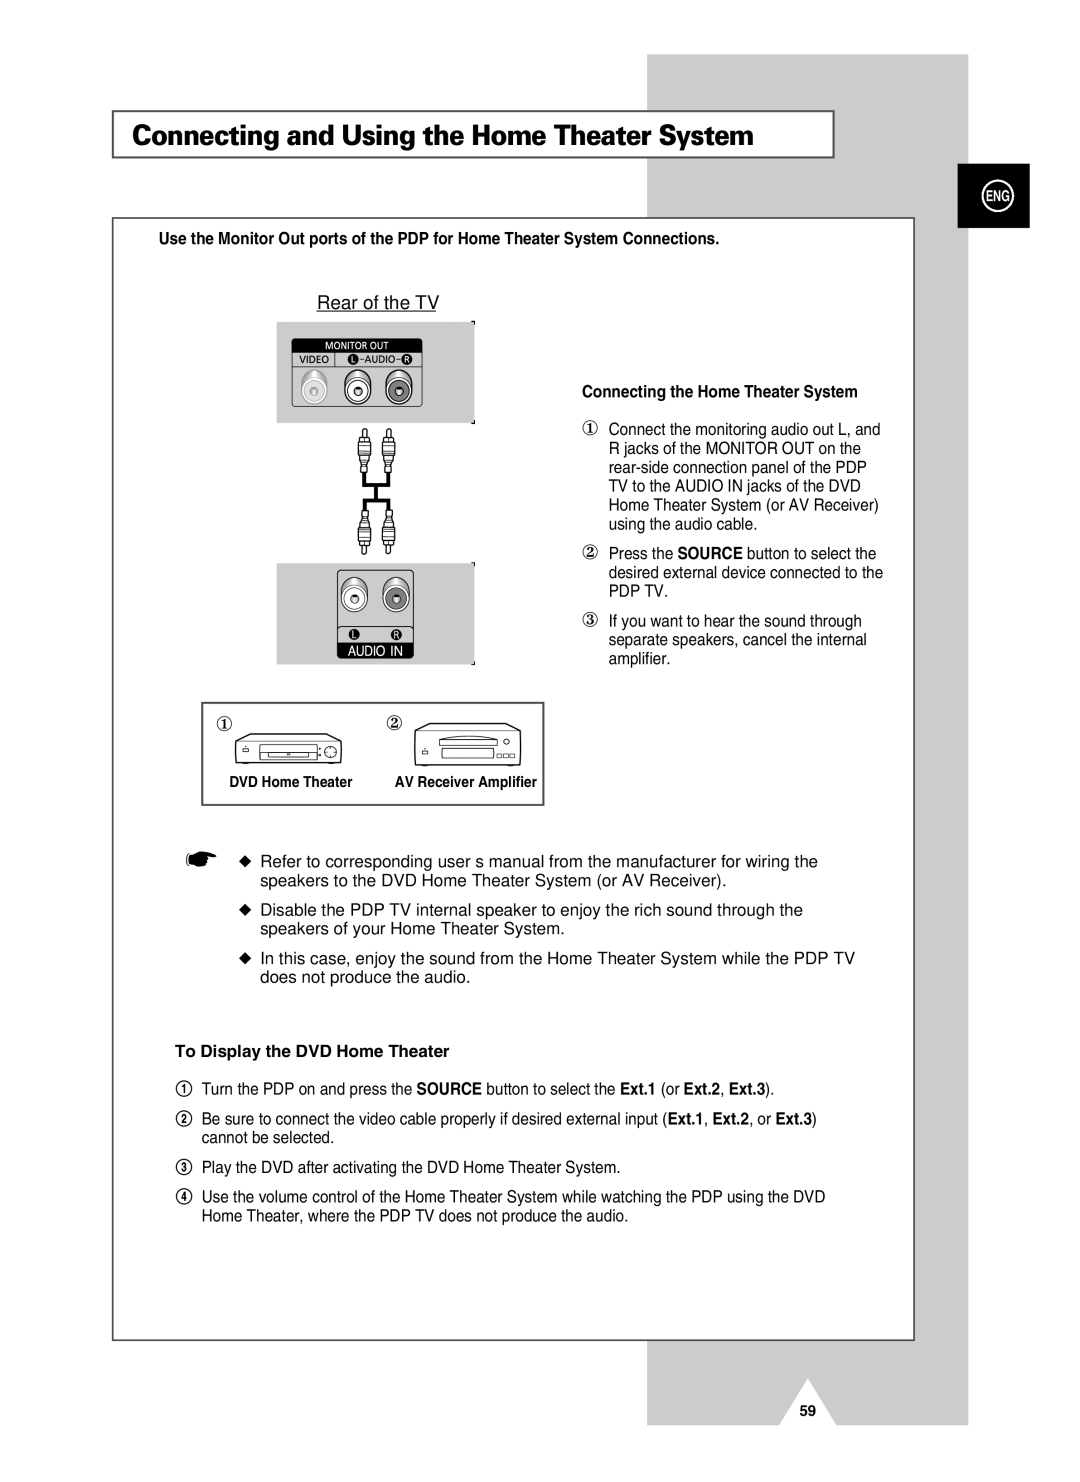 Samsung PS-37S4A manual Connecting and Using the Home Theater System, Connecting the Home Theater System 